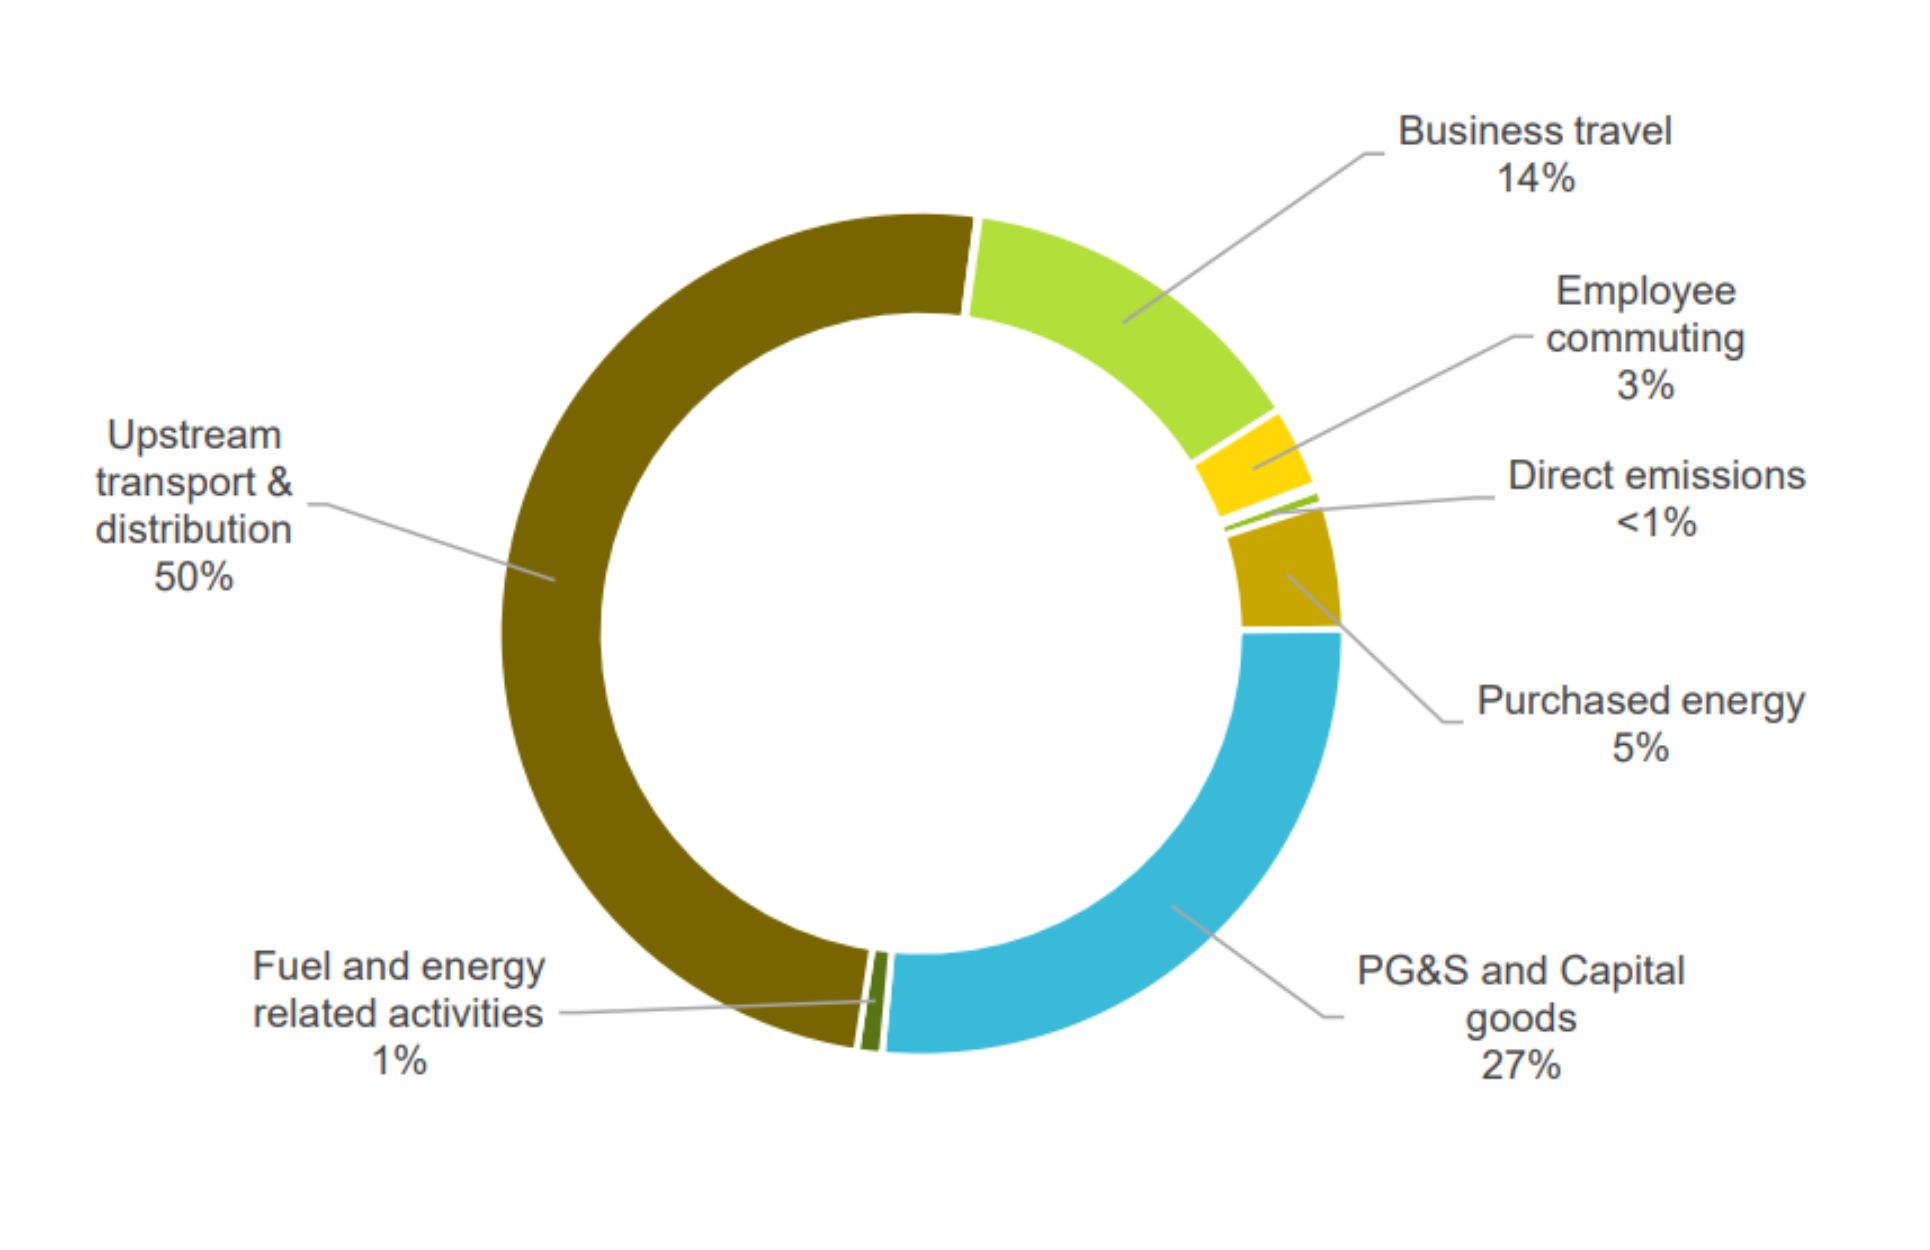 Upstream transport and distribution: 50%, purchased goods and services and capital goods: 27%, business travel: 14%, purchased energy: 5%, employee commuting: 3%, fuel and energy related activities: 1%, direct emissions: less than 1%